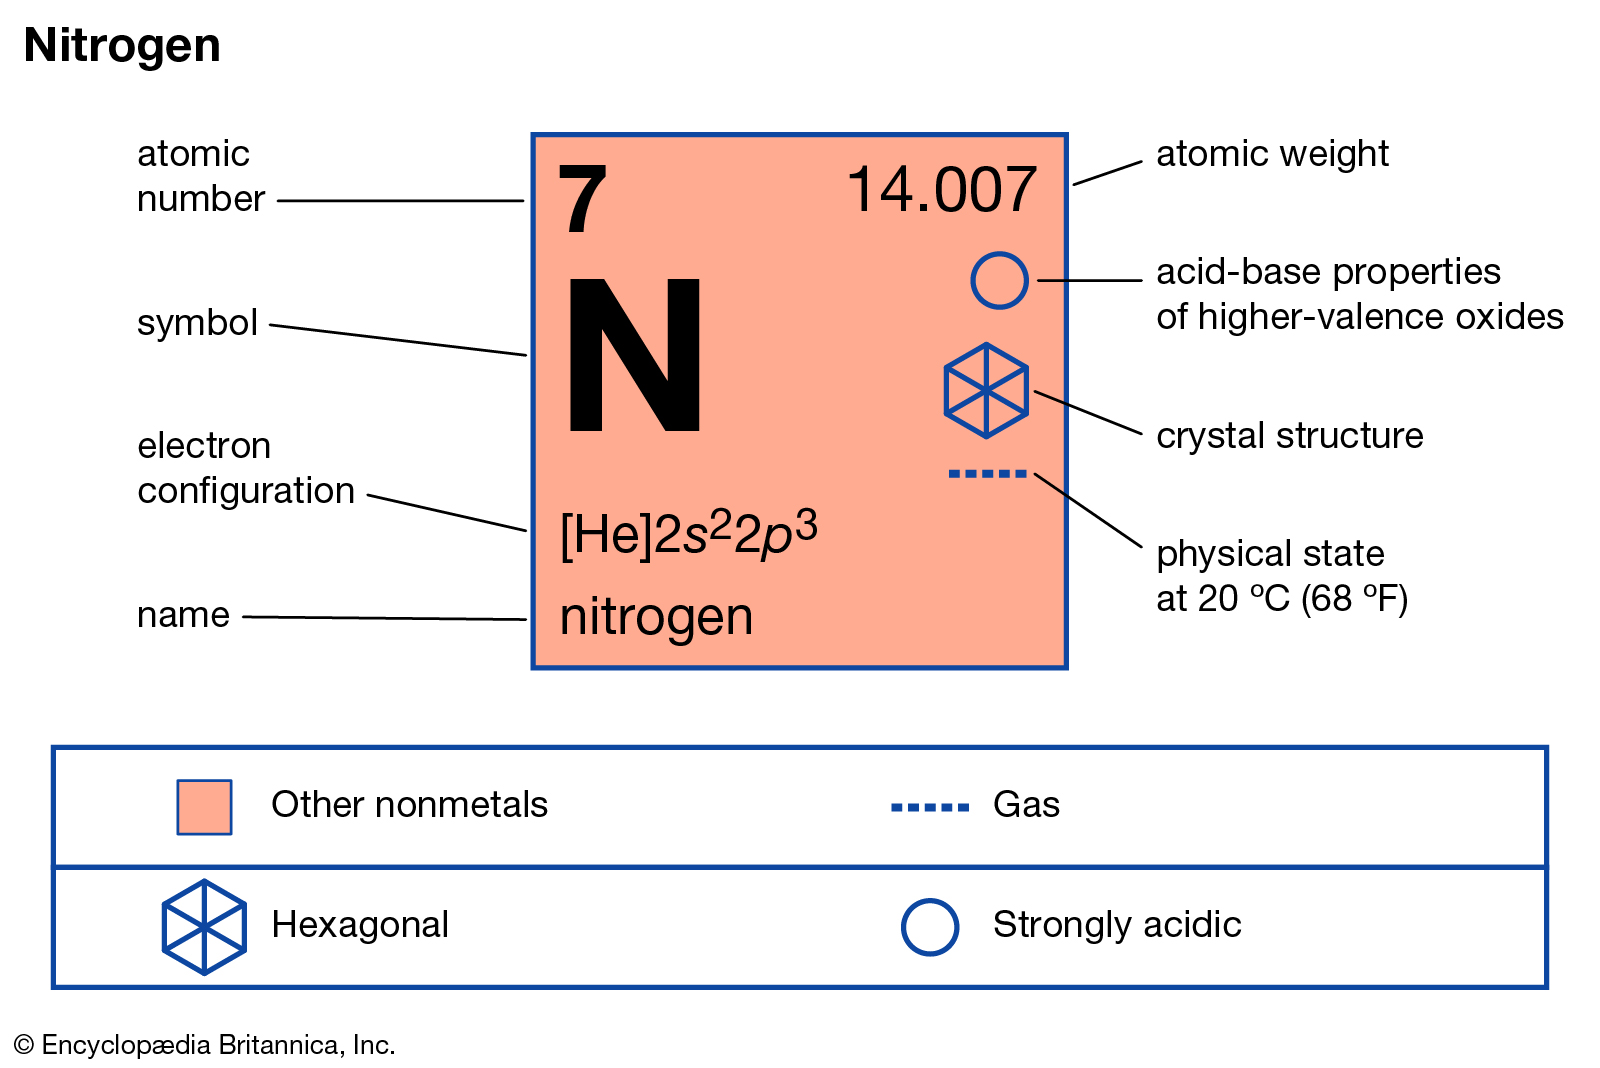 hinh-anh-interesting-facts-about-nitrogen-37-0